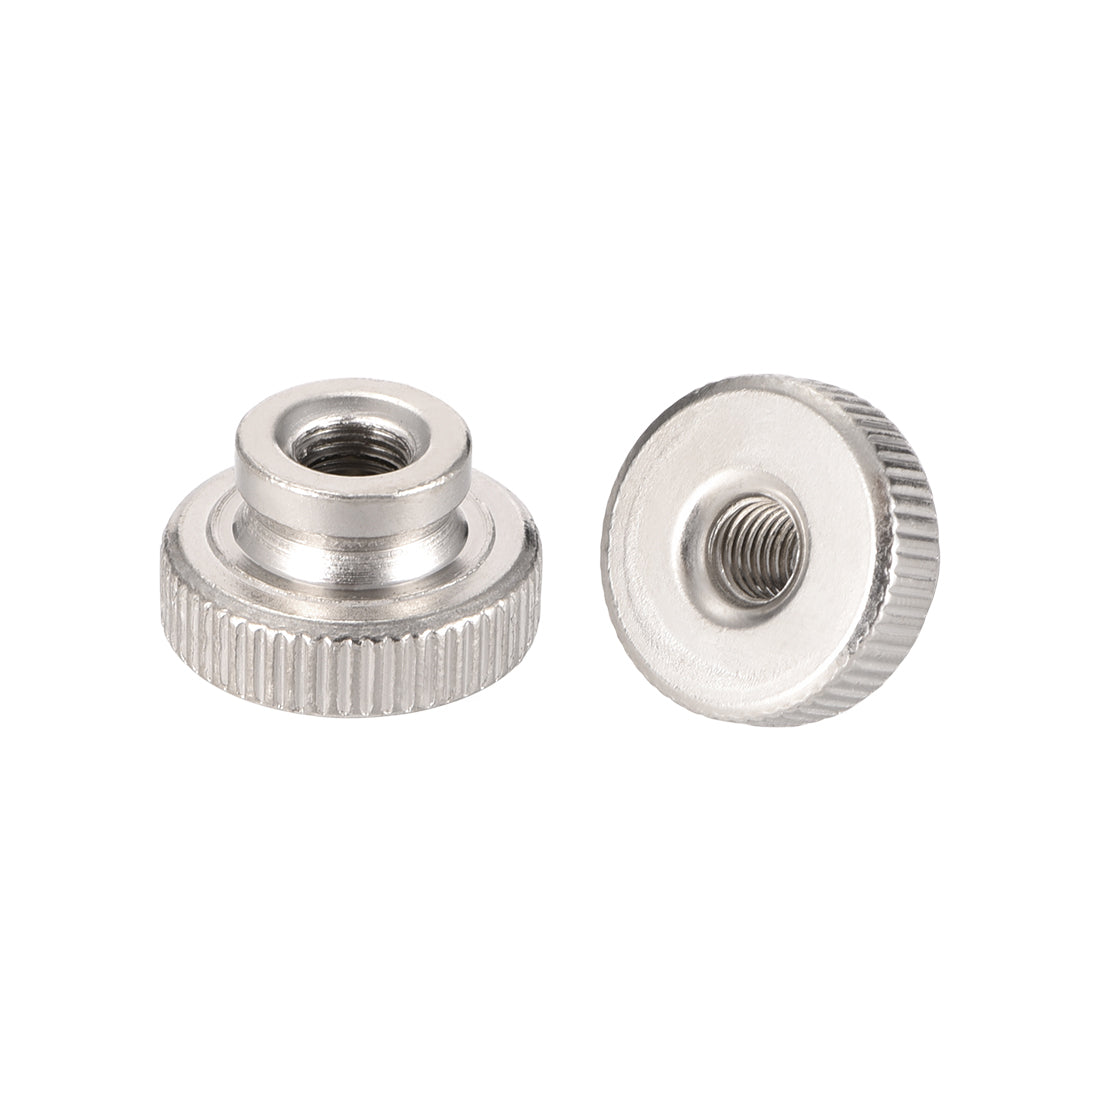 uxcell Uxcell Knurled Thumb Nuts, Iron Round Knobs for 3D Printer Part